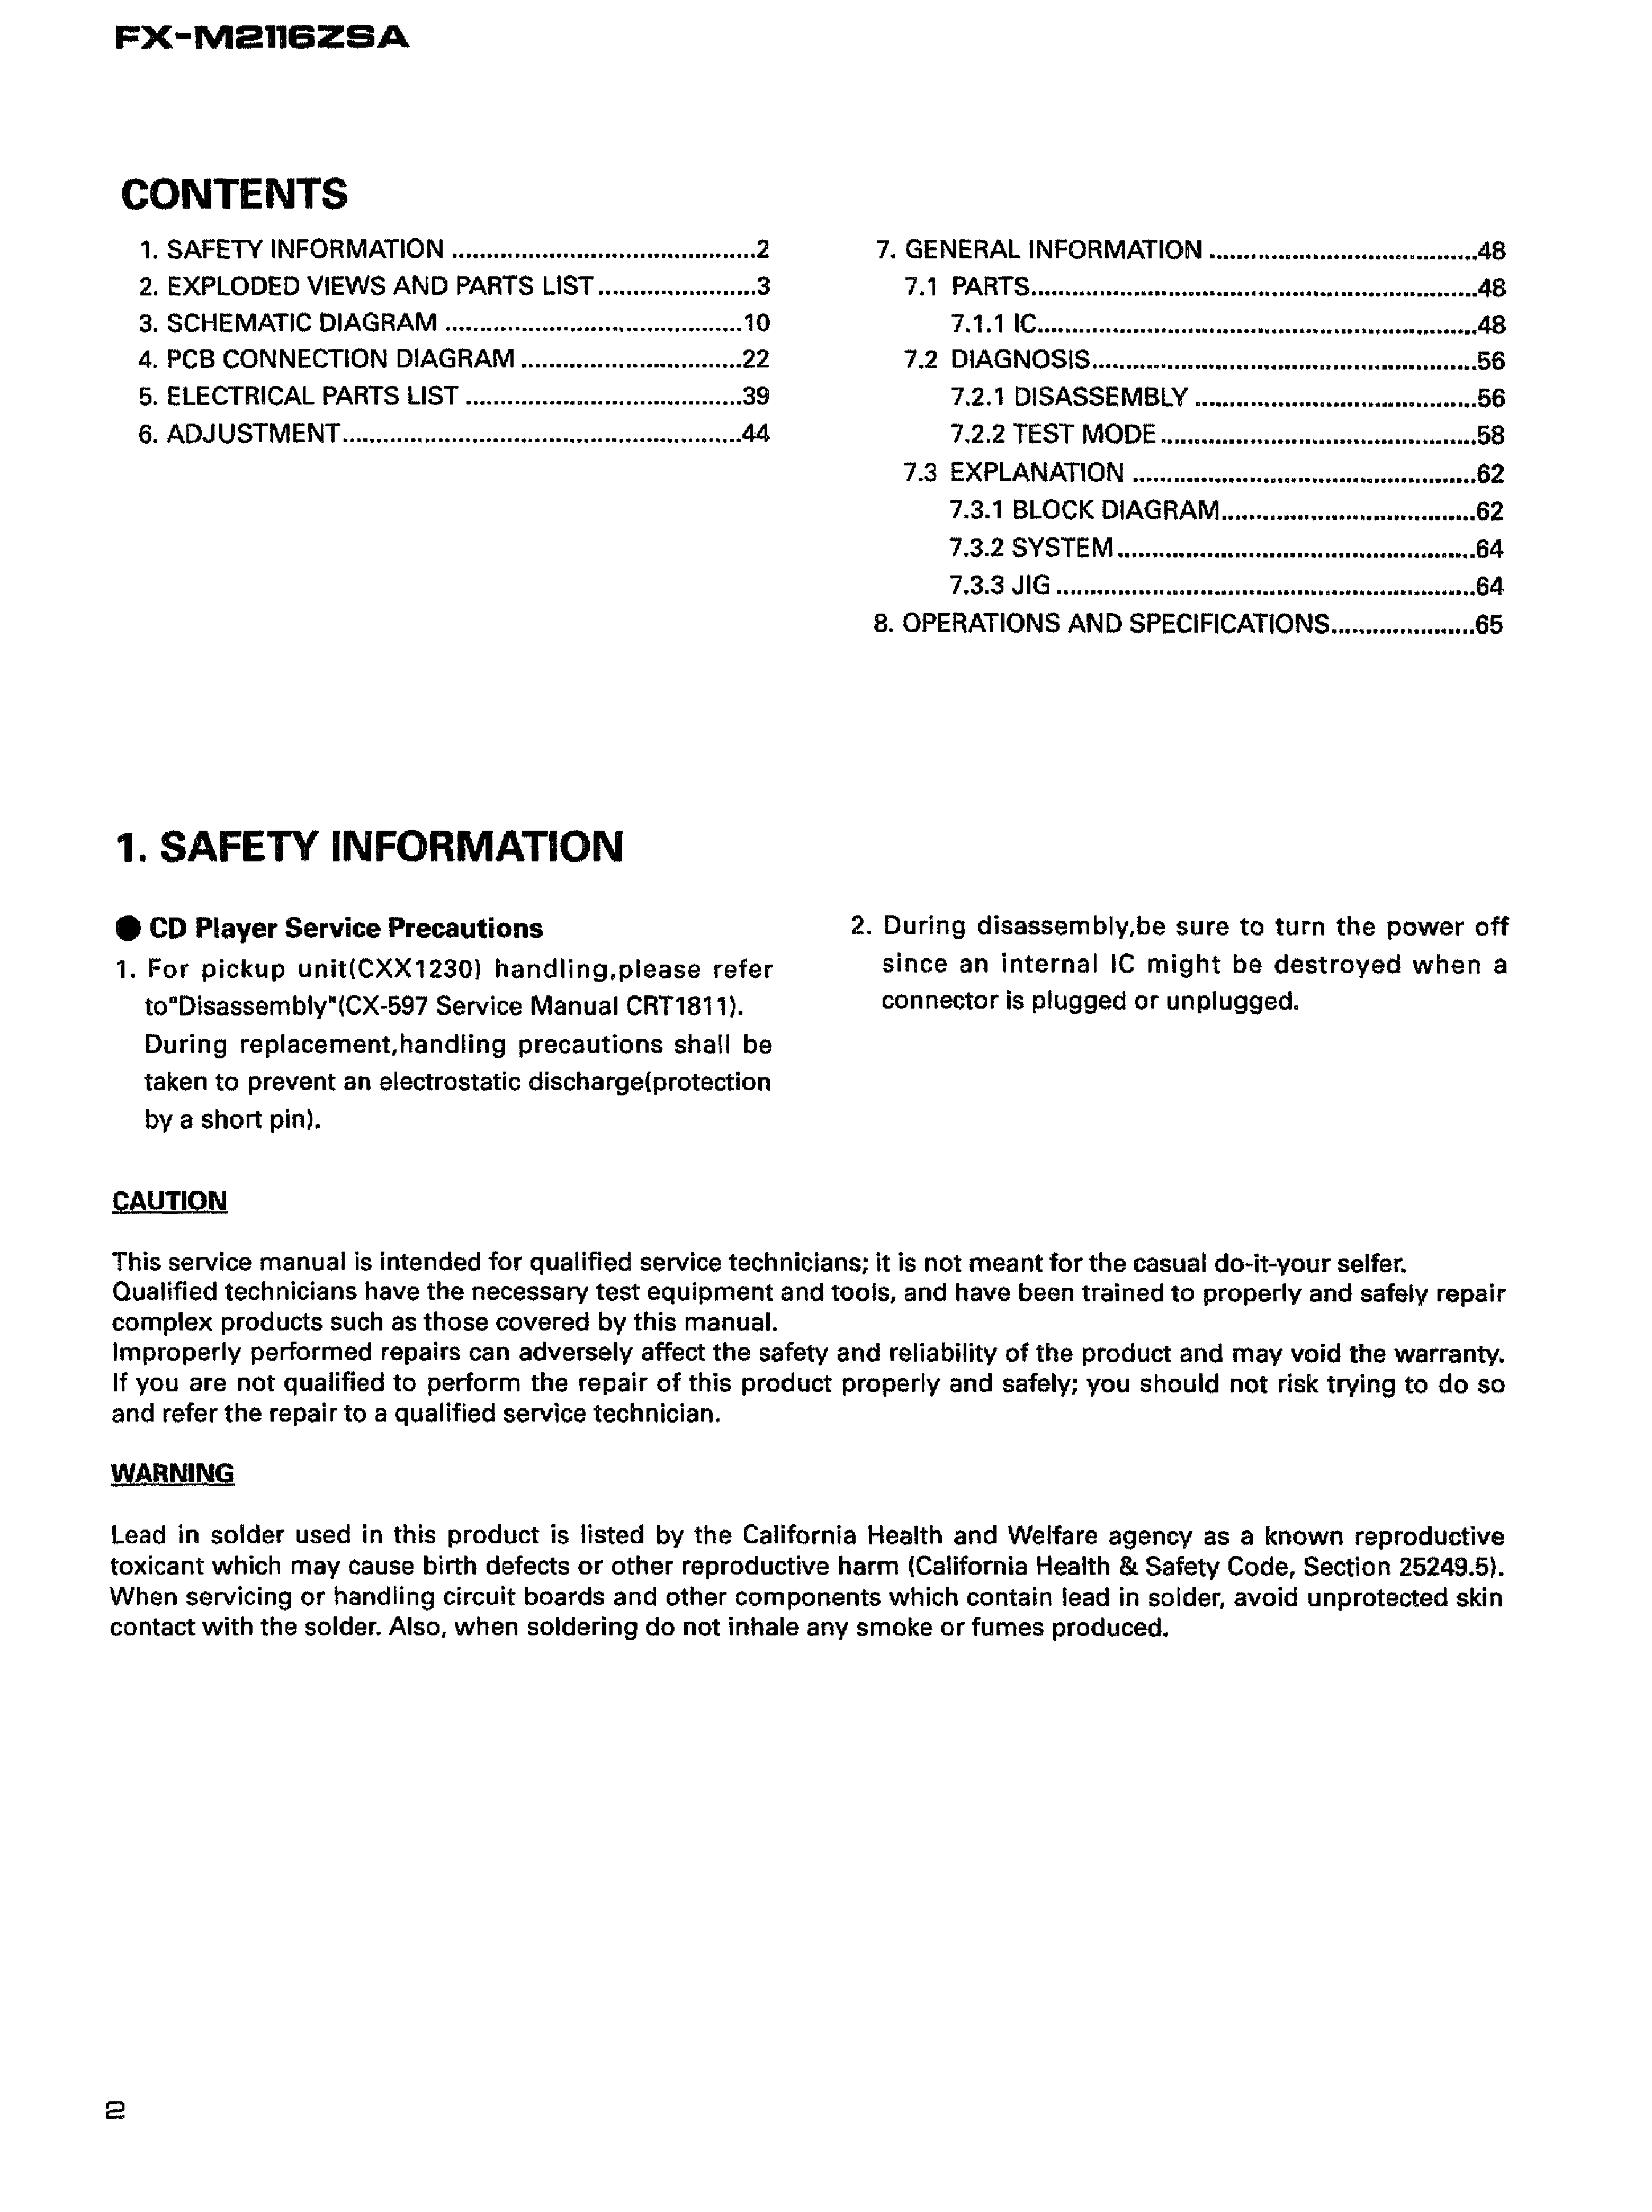 PIONEER FX-M2116 SM service manual (2nd page)